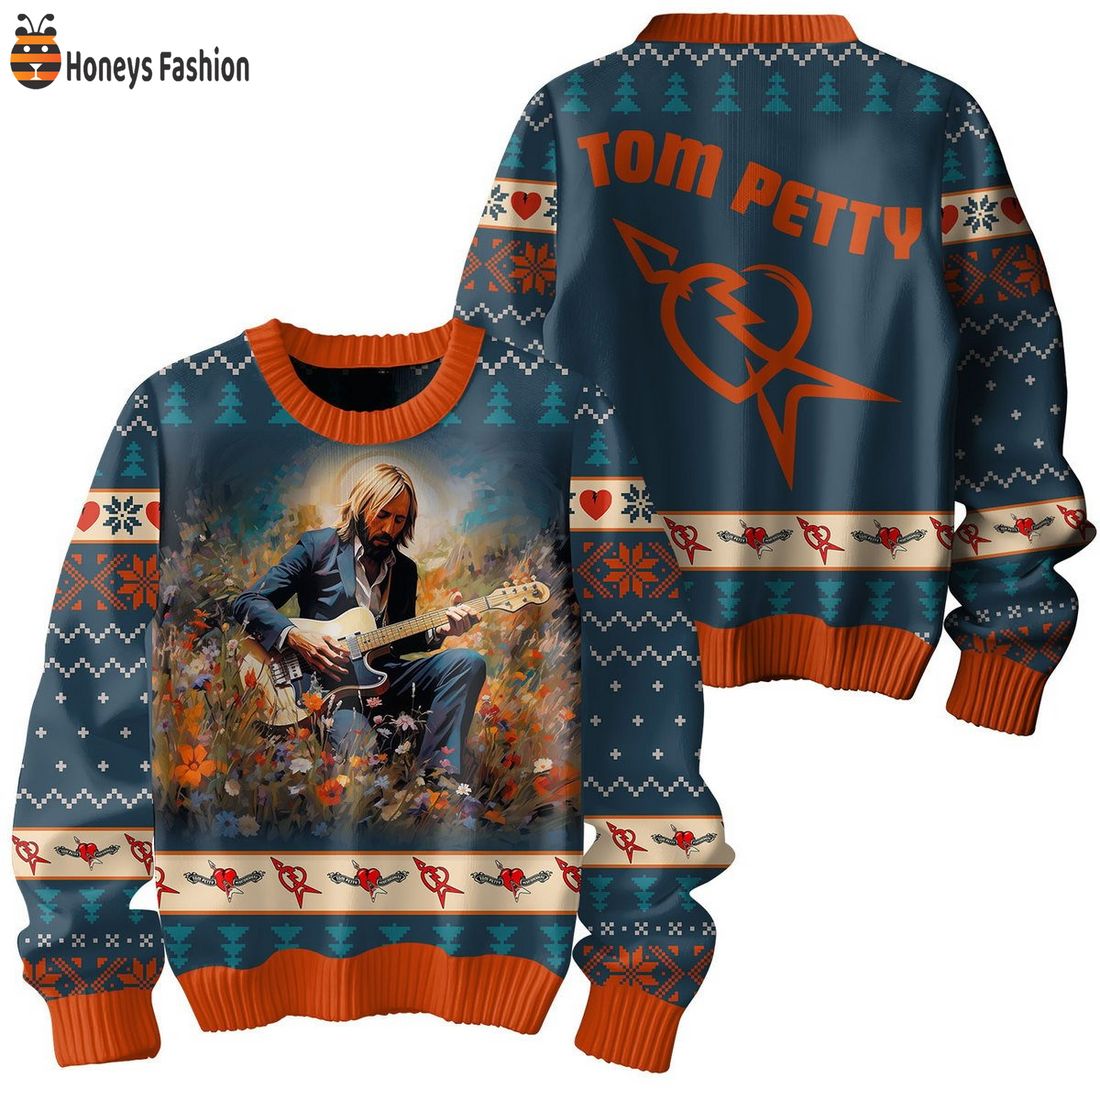 Tom Petty Over Flowers Ugly Christmas Sweater